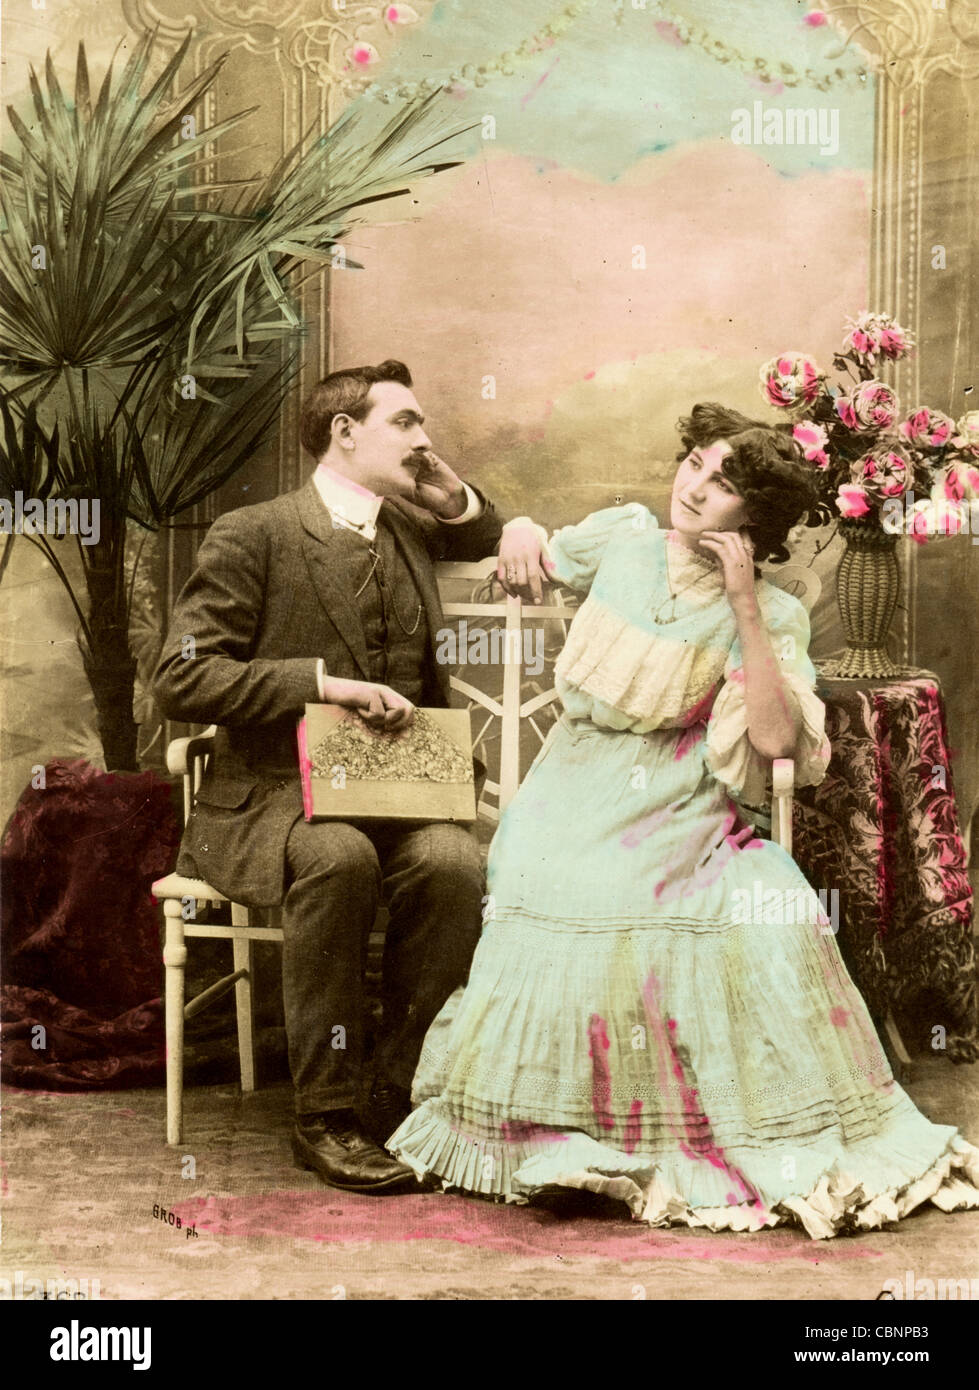 Bored 1900s Couple Sitting Together Stock Photo